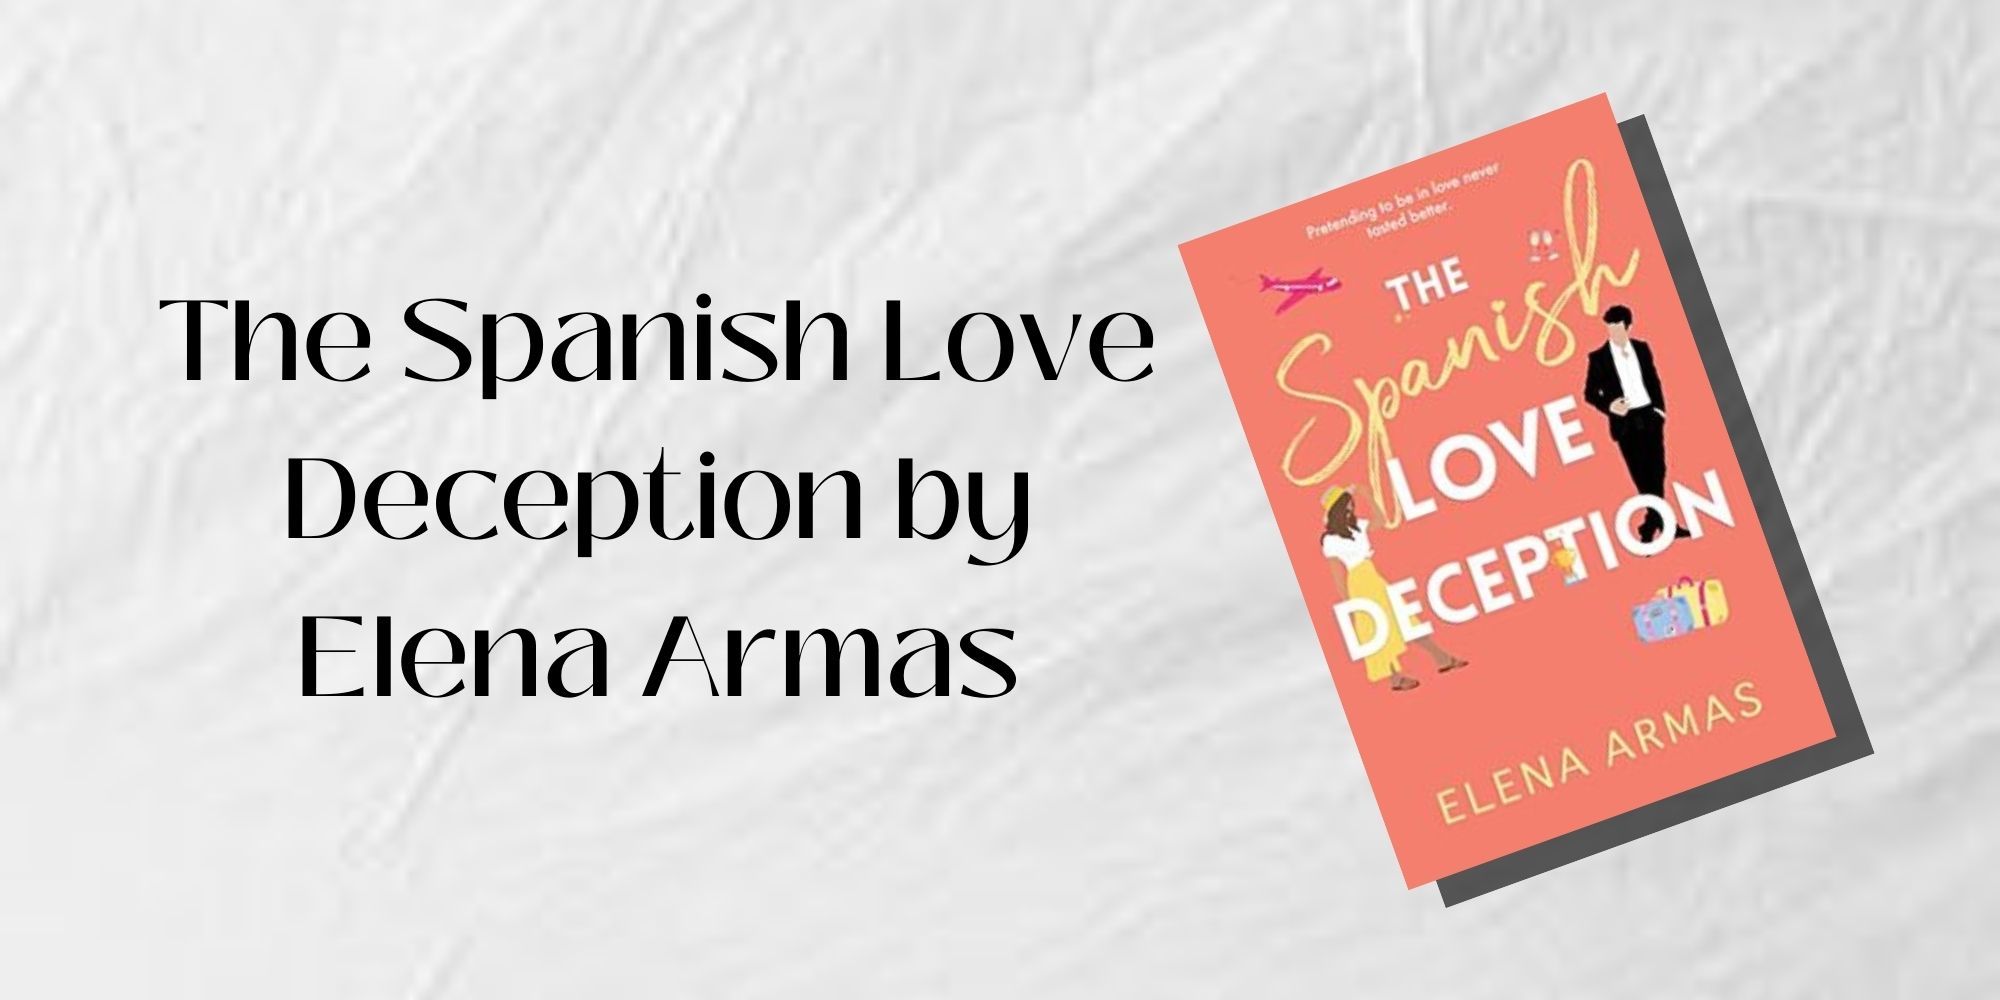 The Cover of The Spanish Love Deception by Elena Armas